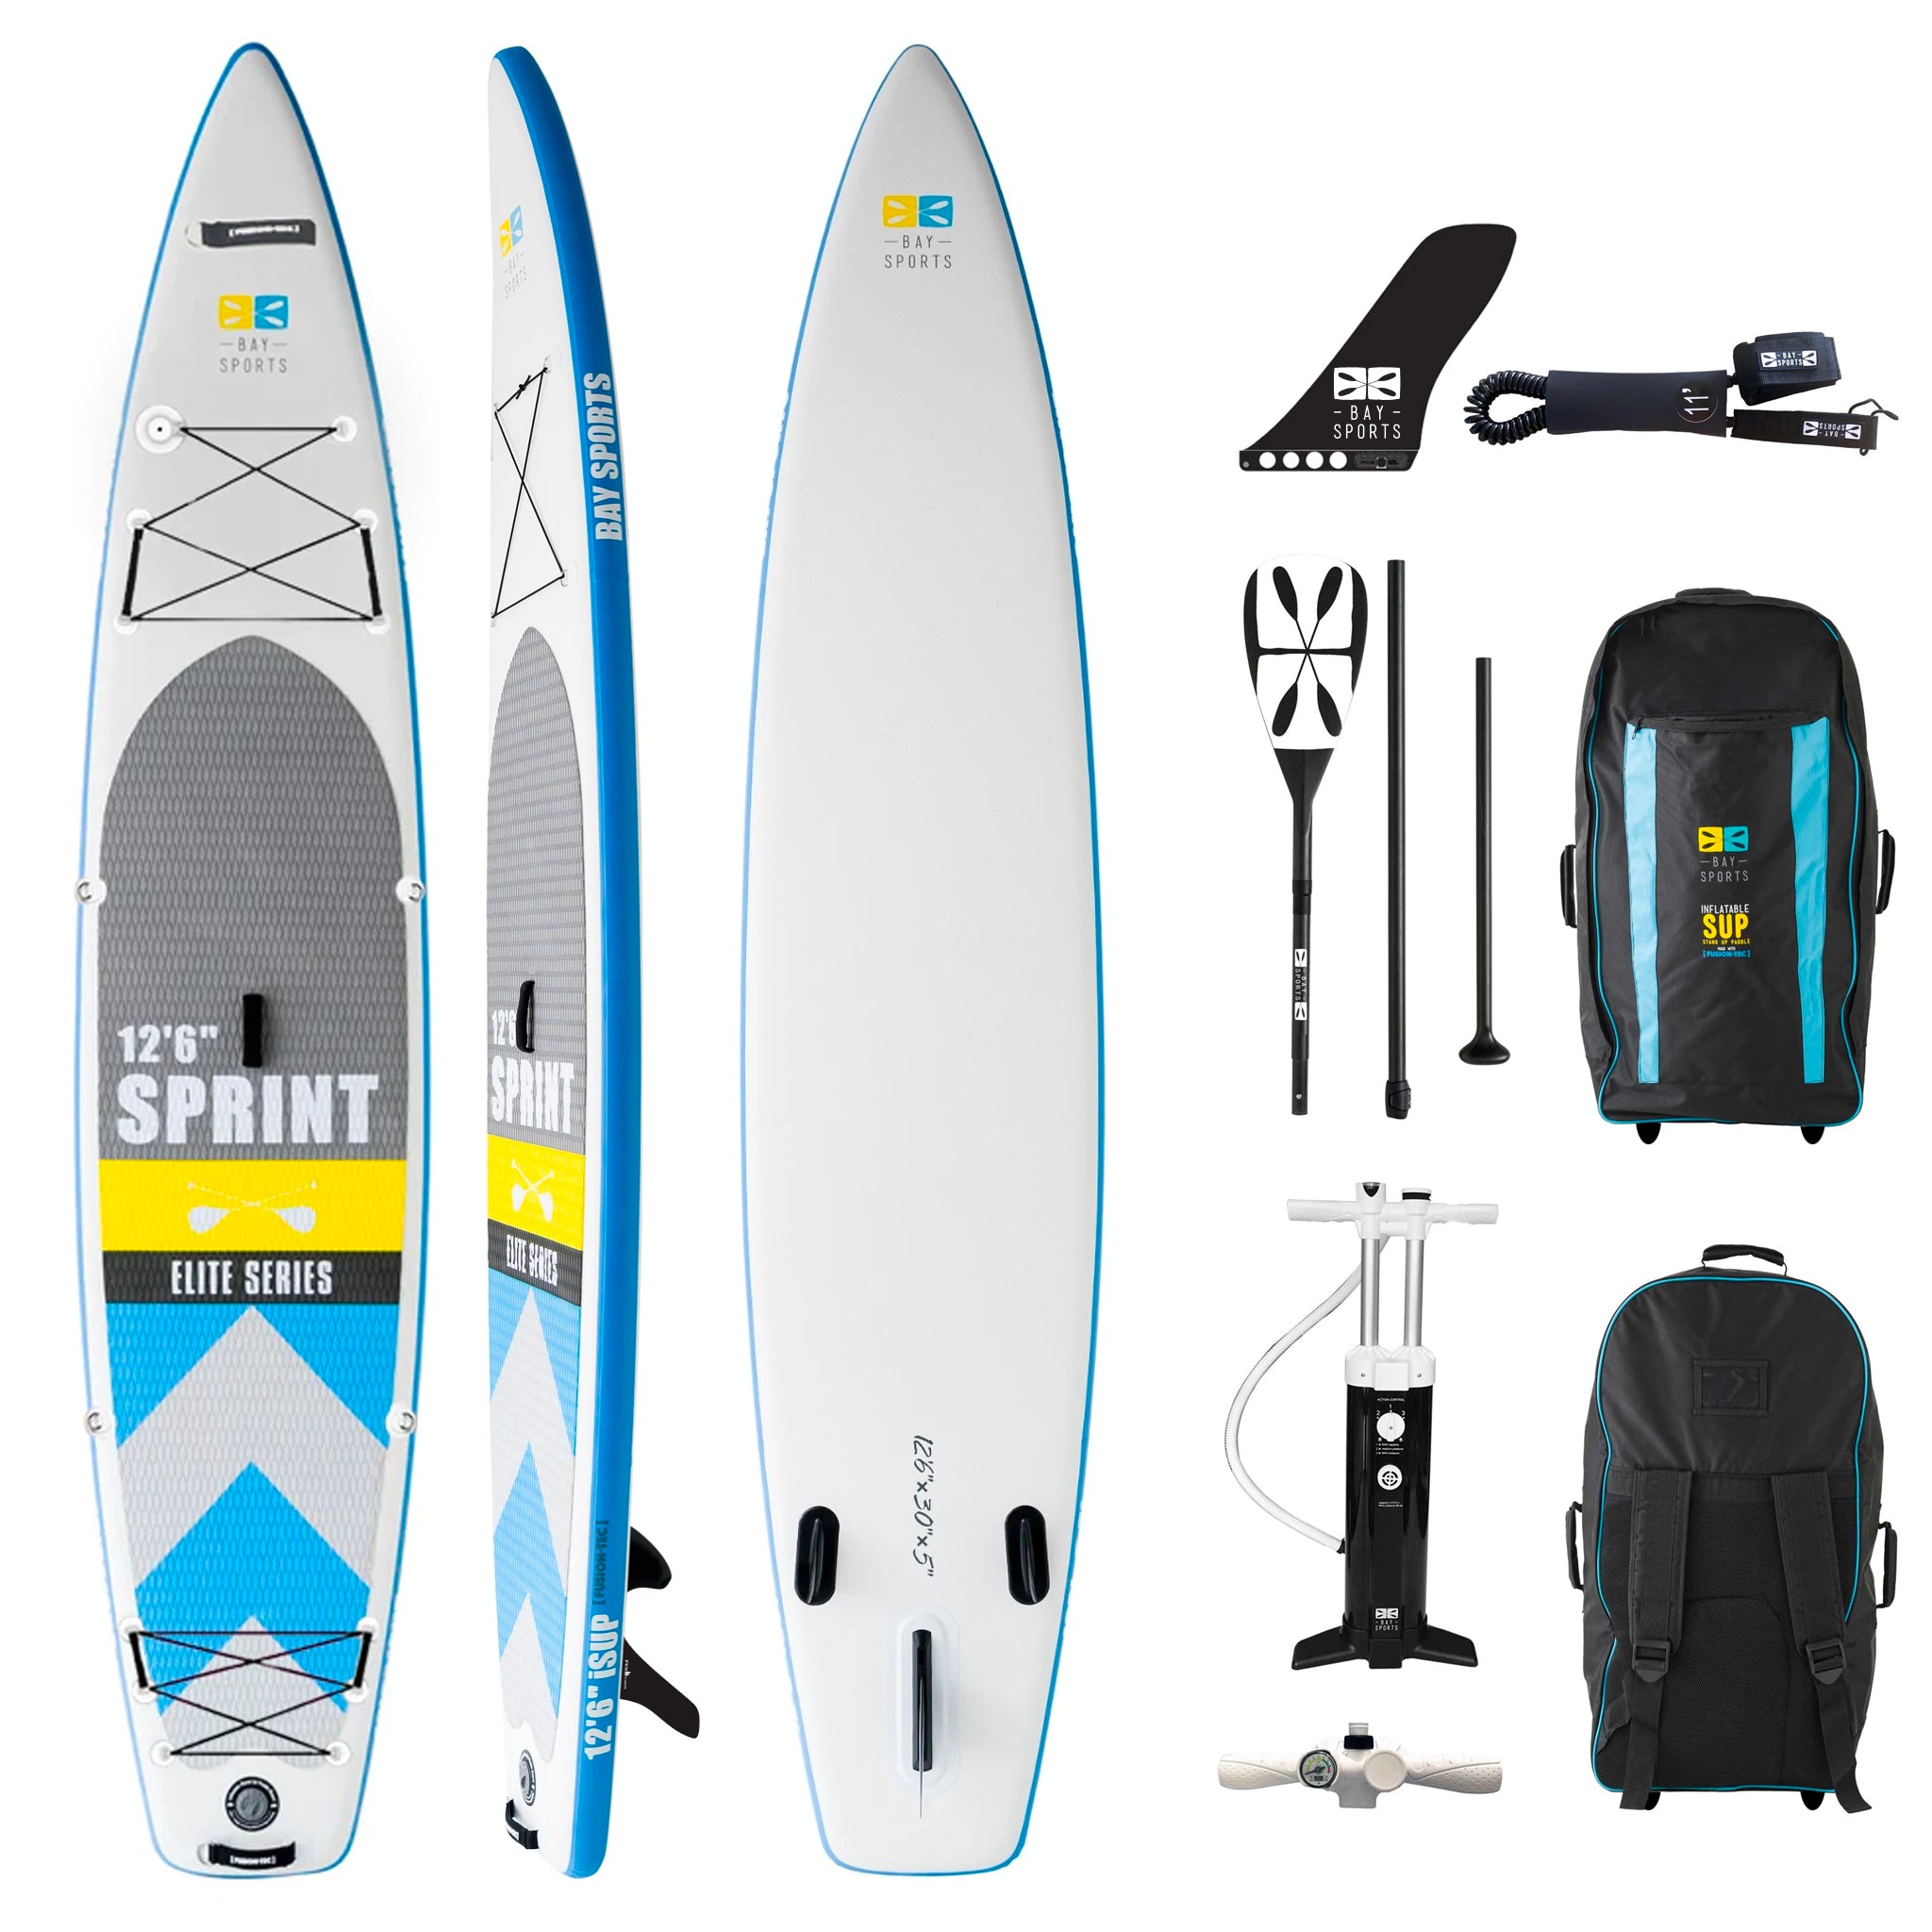 12'6 Sprint - Premium Inflatable Stand Up Paddle Board Package